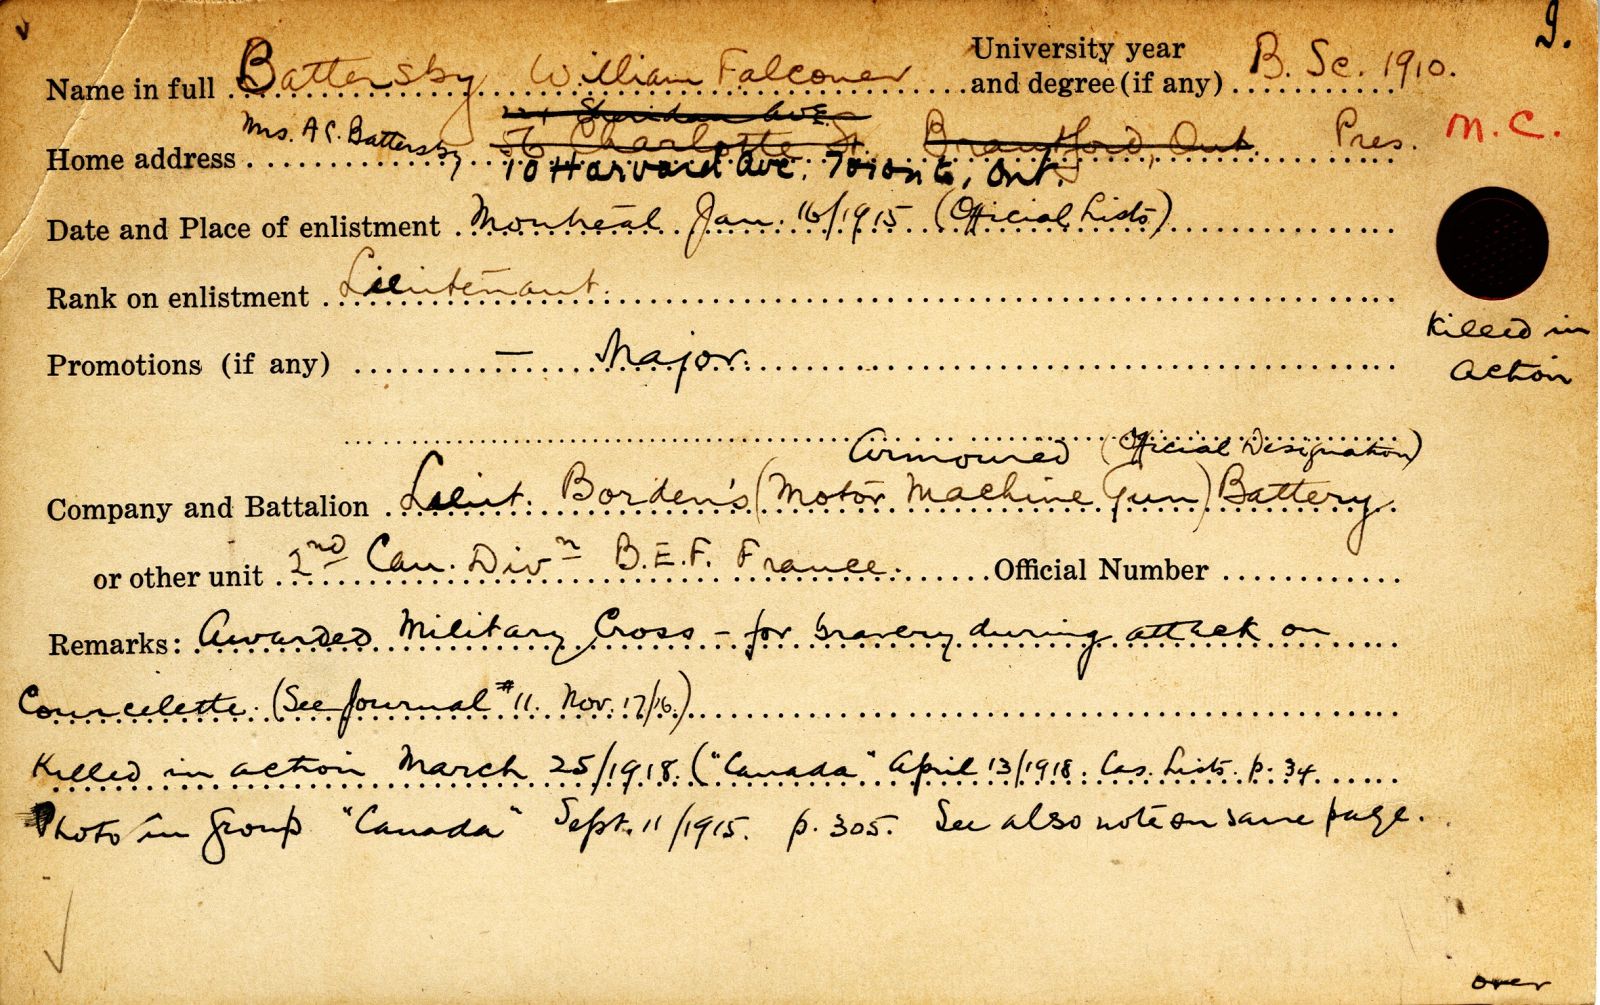 University Military Record of Battersby